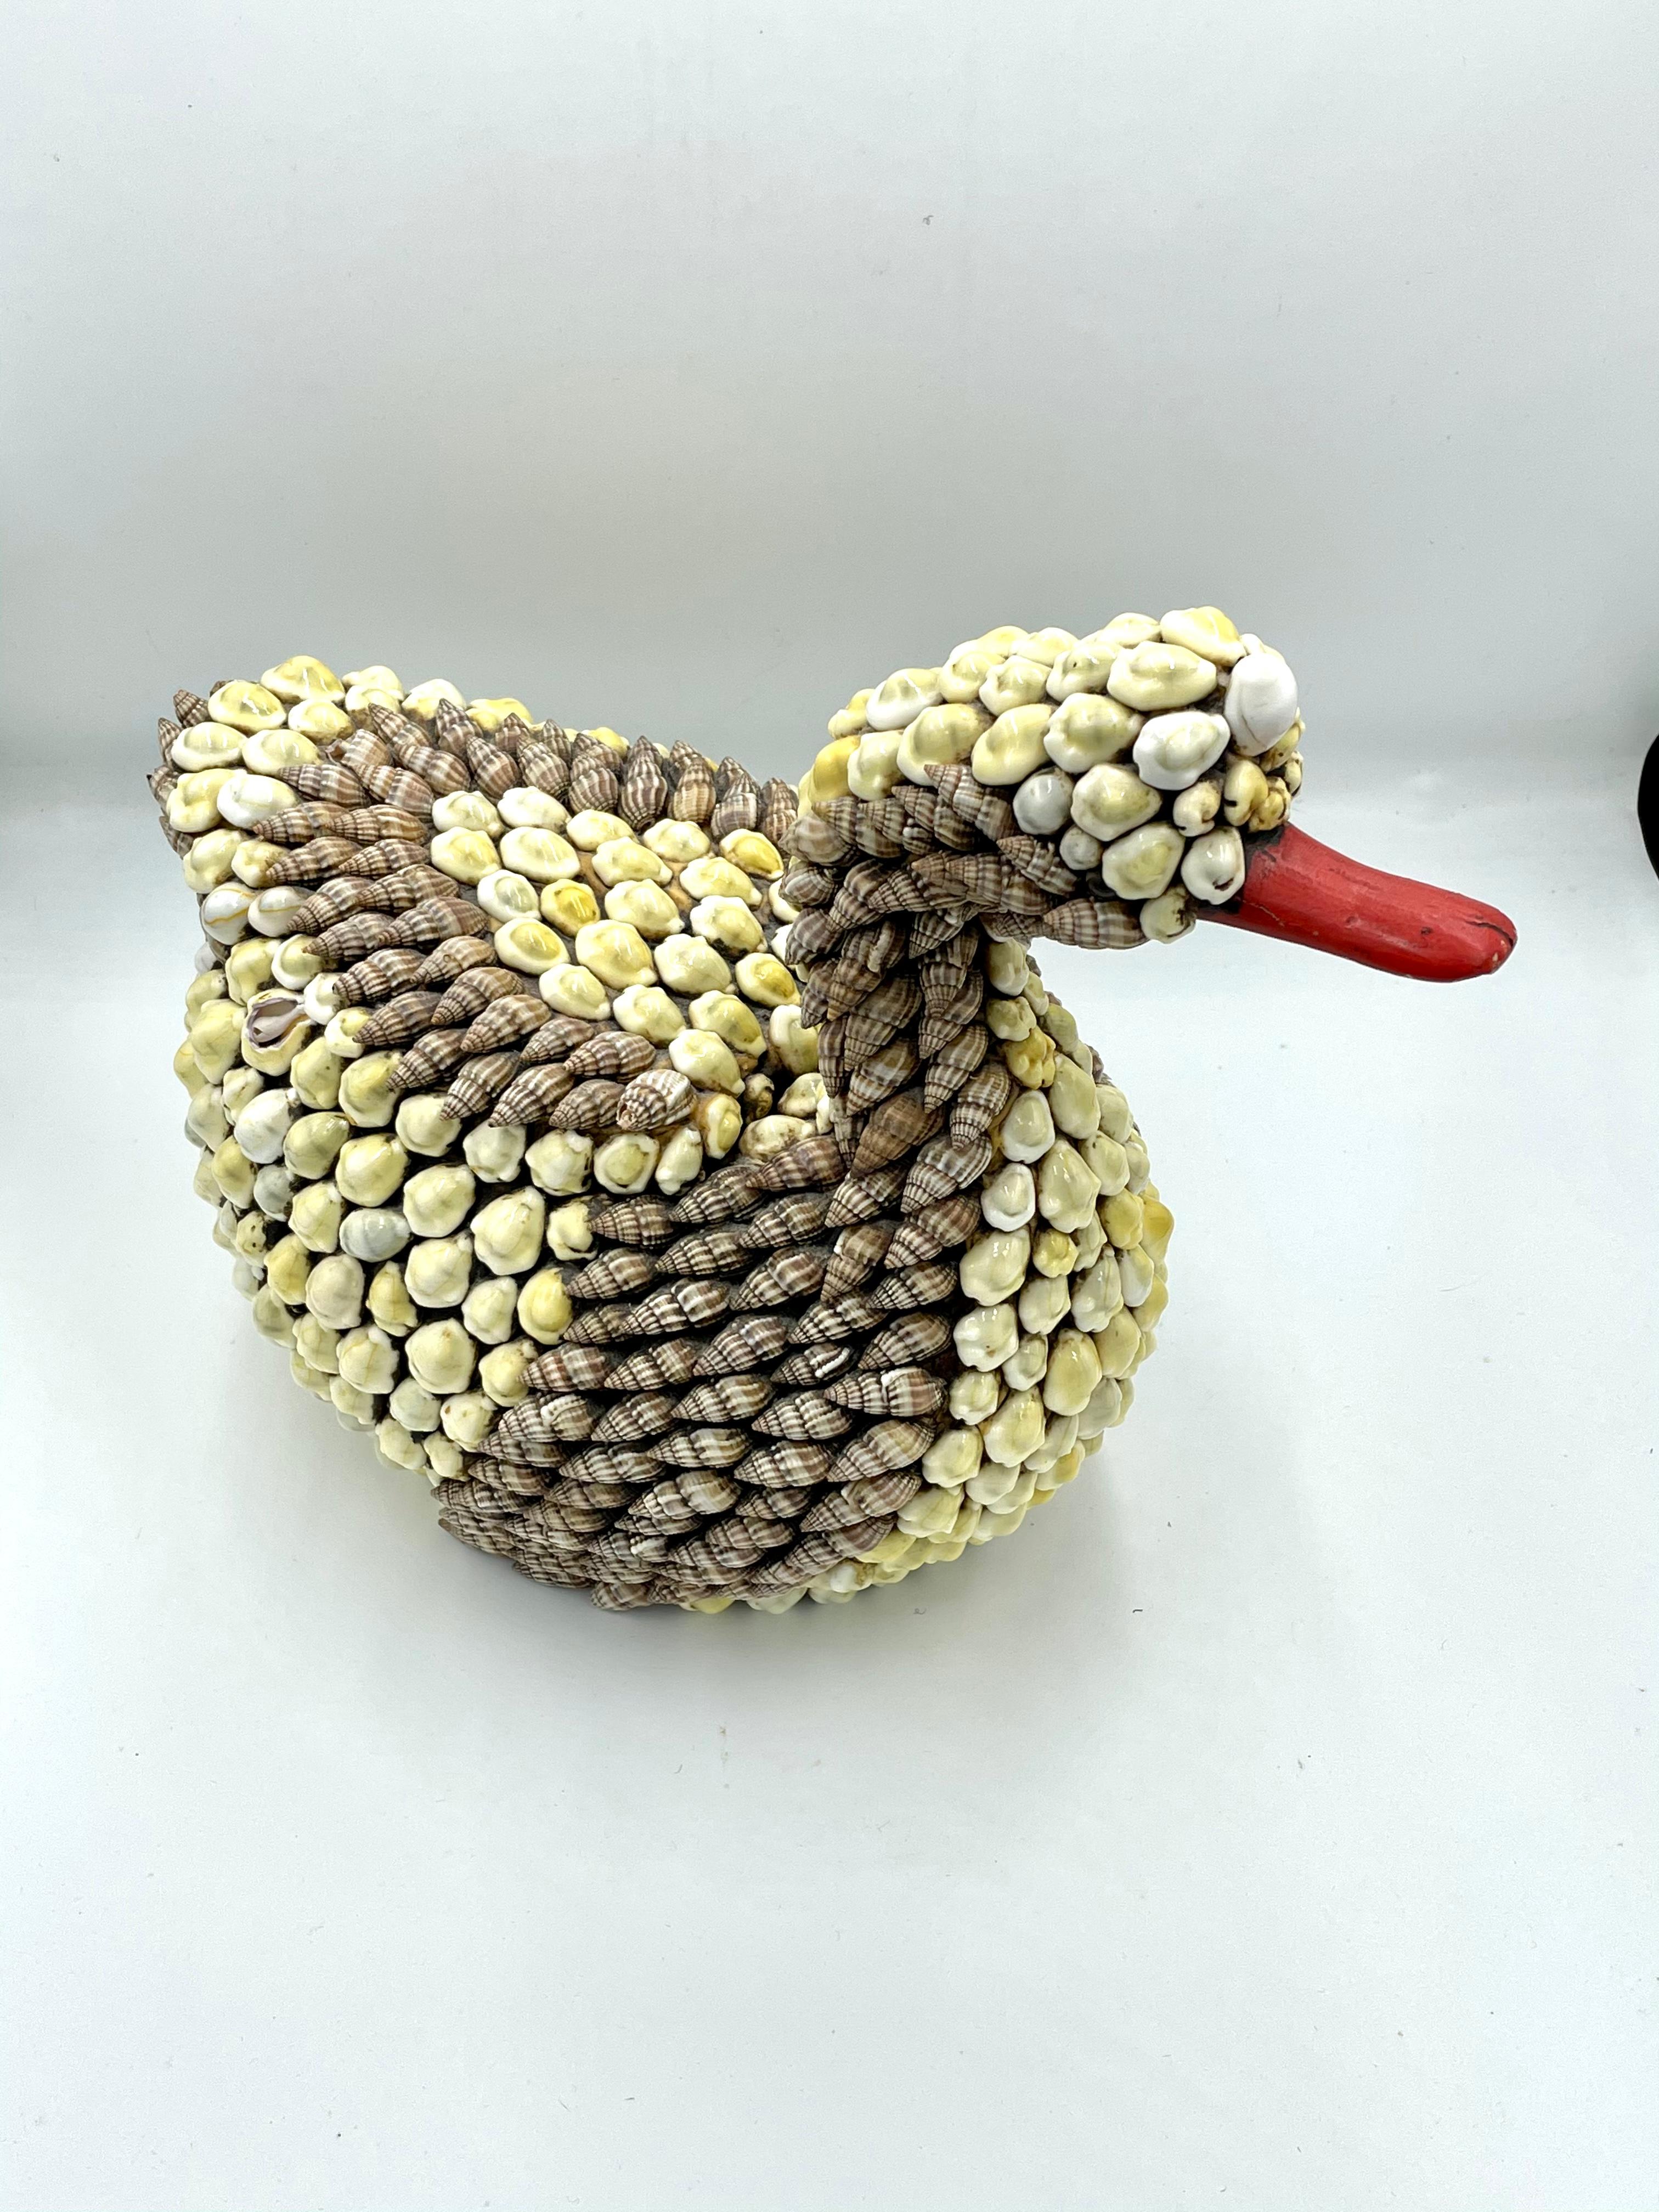 Beautiful RARE Anthony Redmile shell encrusted swan or duck form box, 20th c.
Red lined interior with 